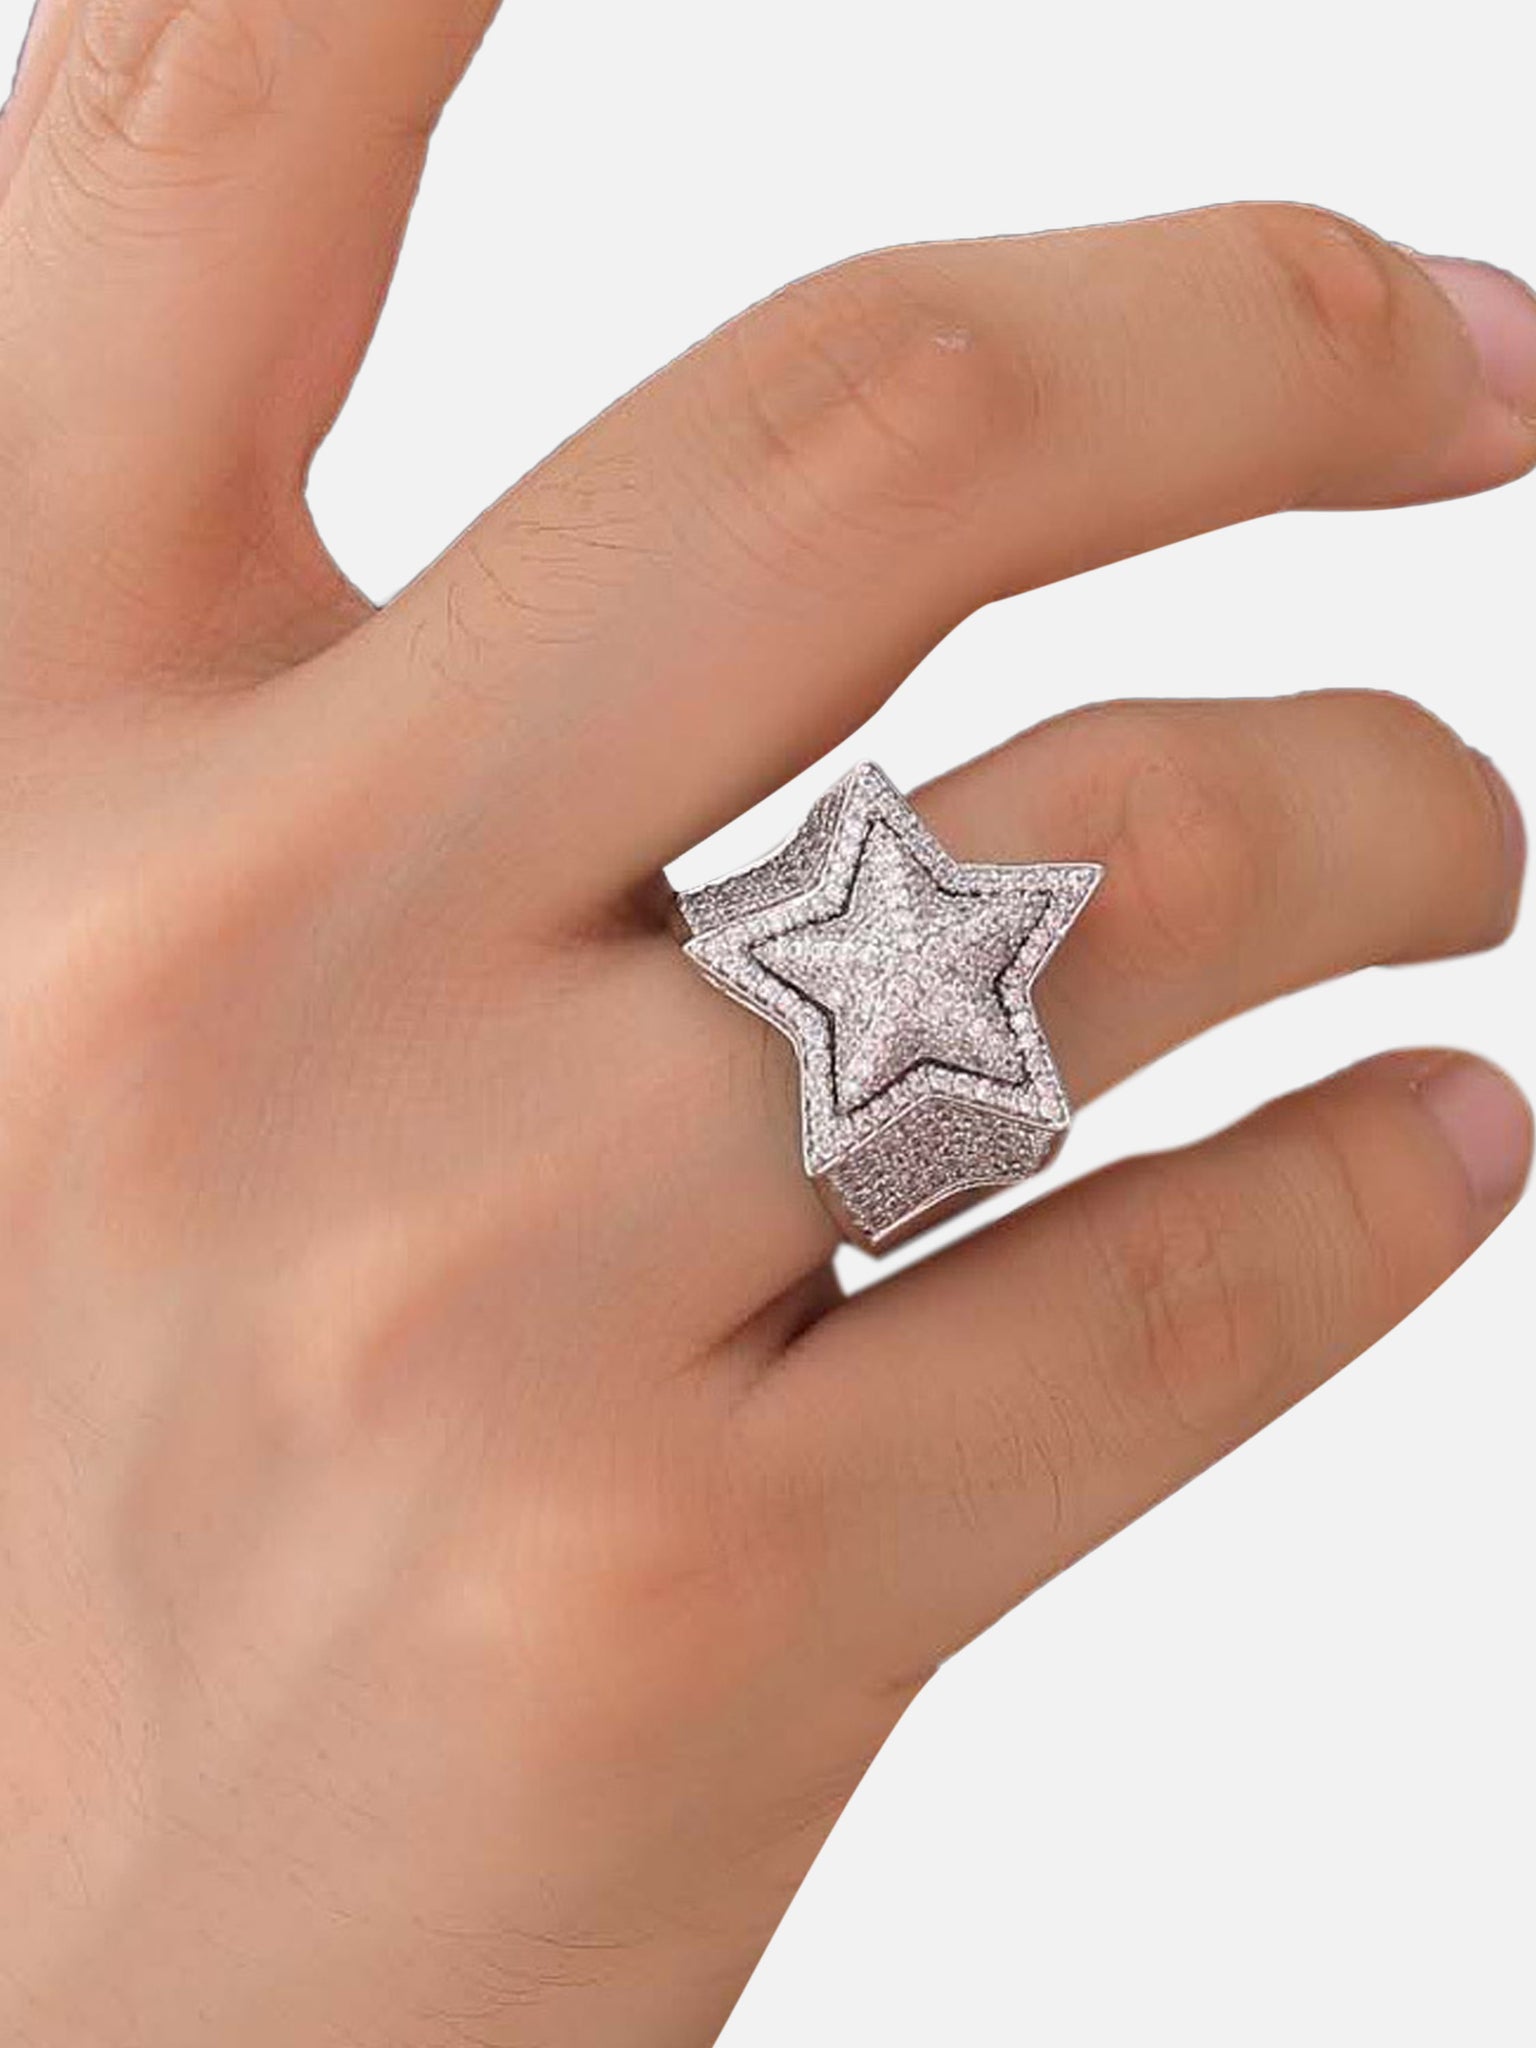 The Supermade Hip Hop Full Diamond Three-dimensional Pentagram Double Layer Ring